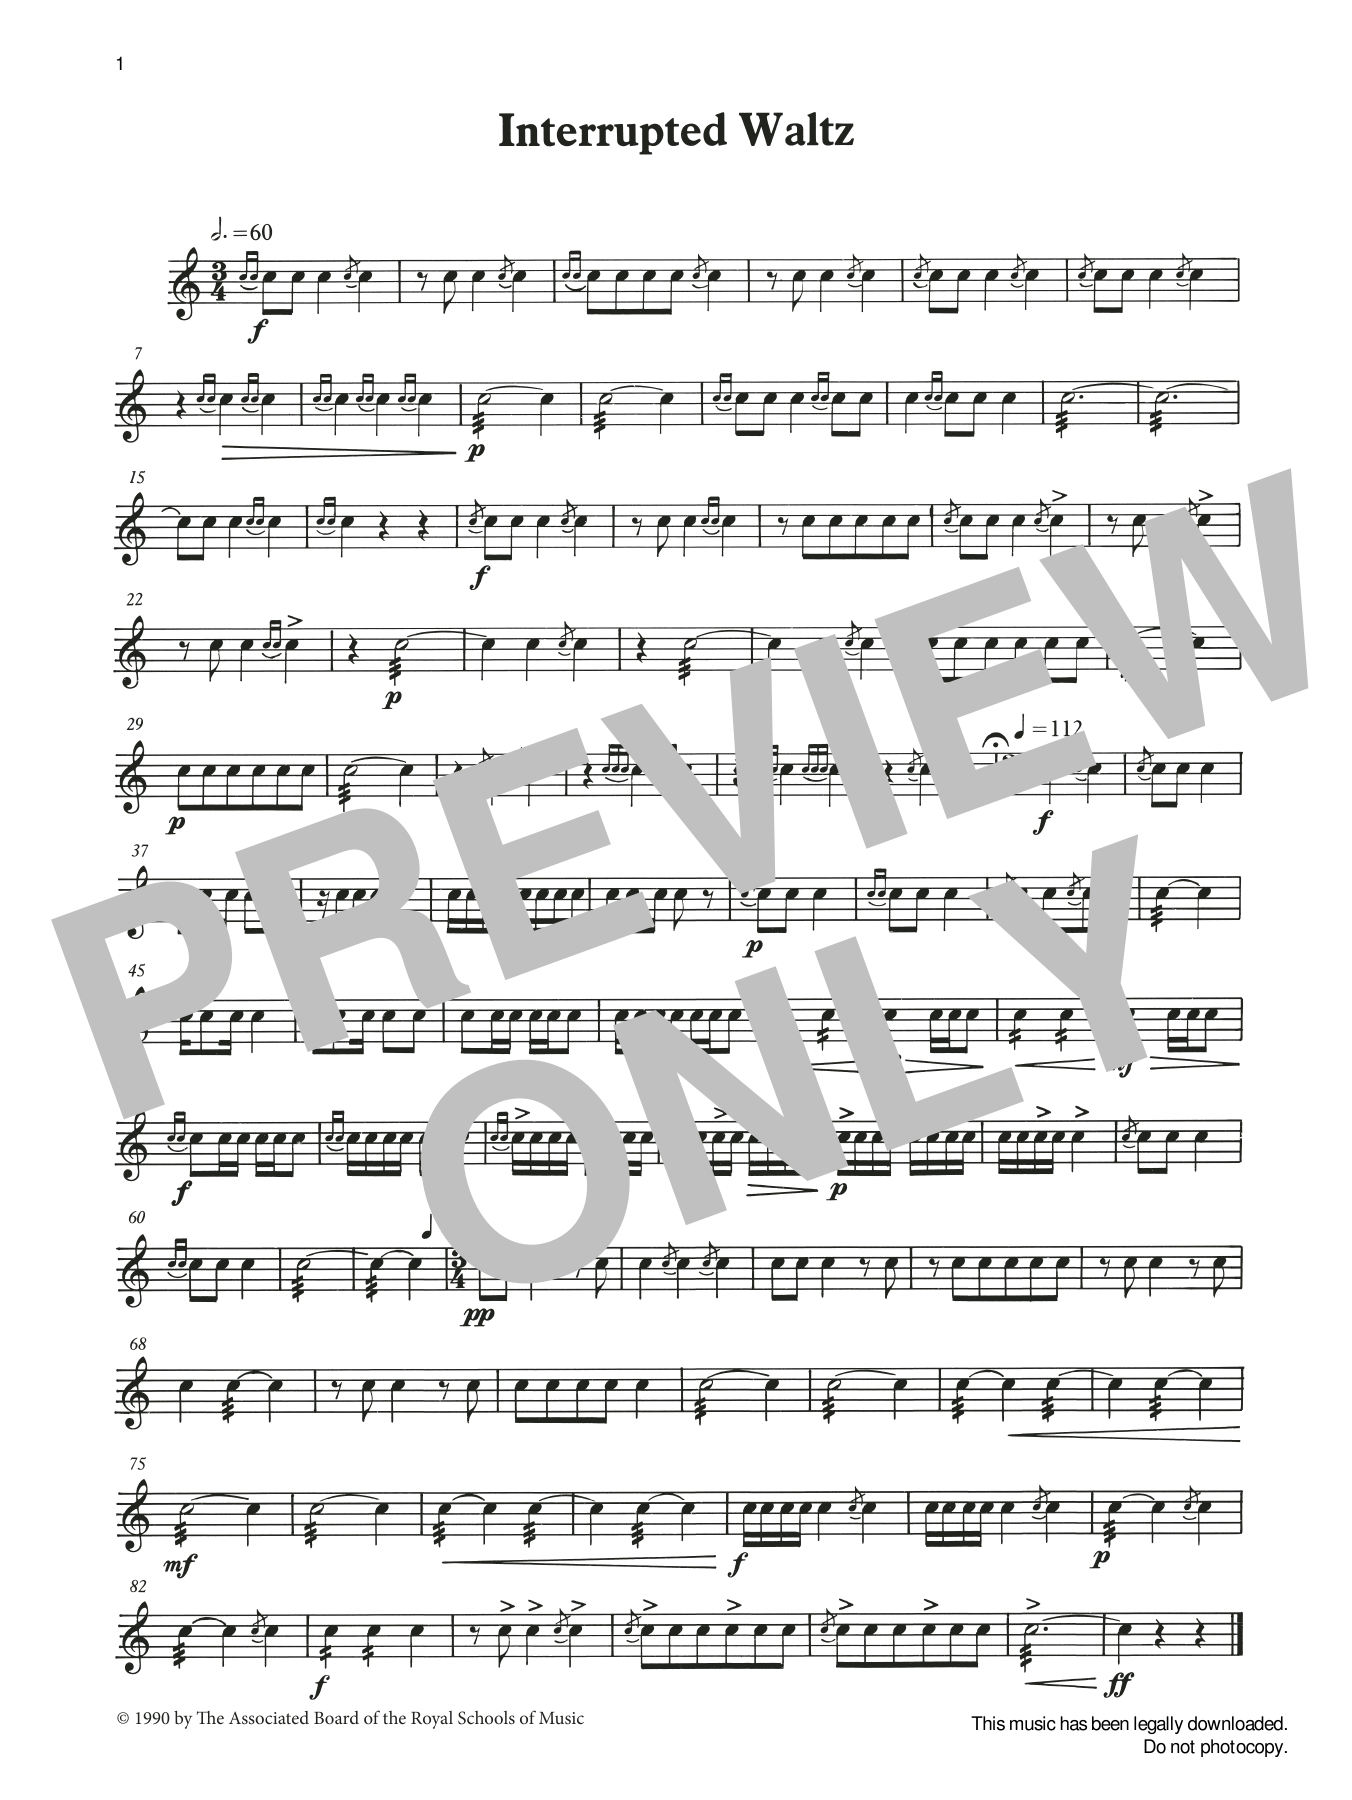 Download Ian Wright and Kevin Hathaway Interrupted Waltz from Graded Music for Sheet Music